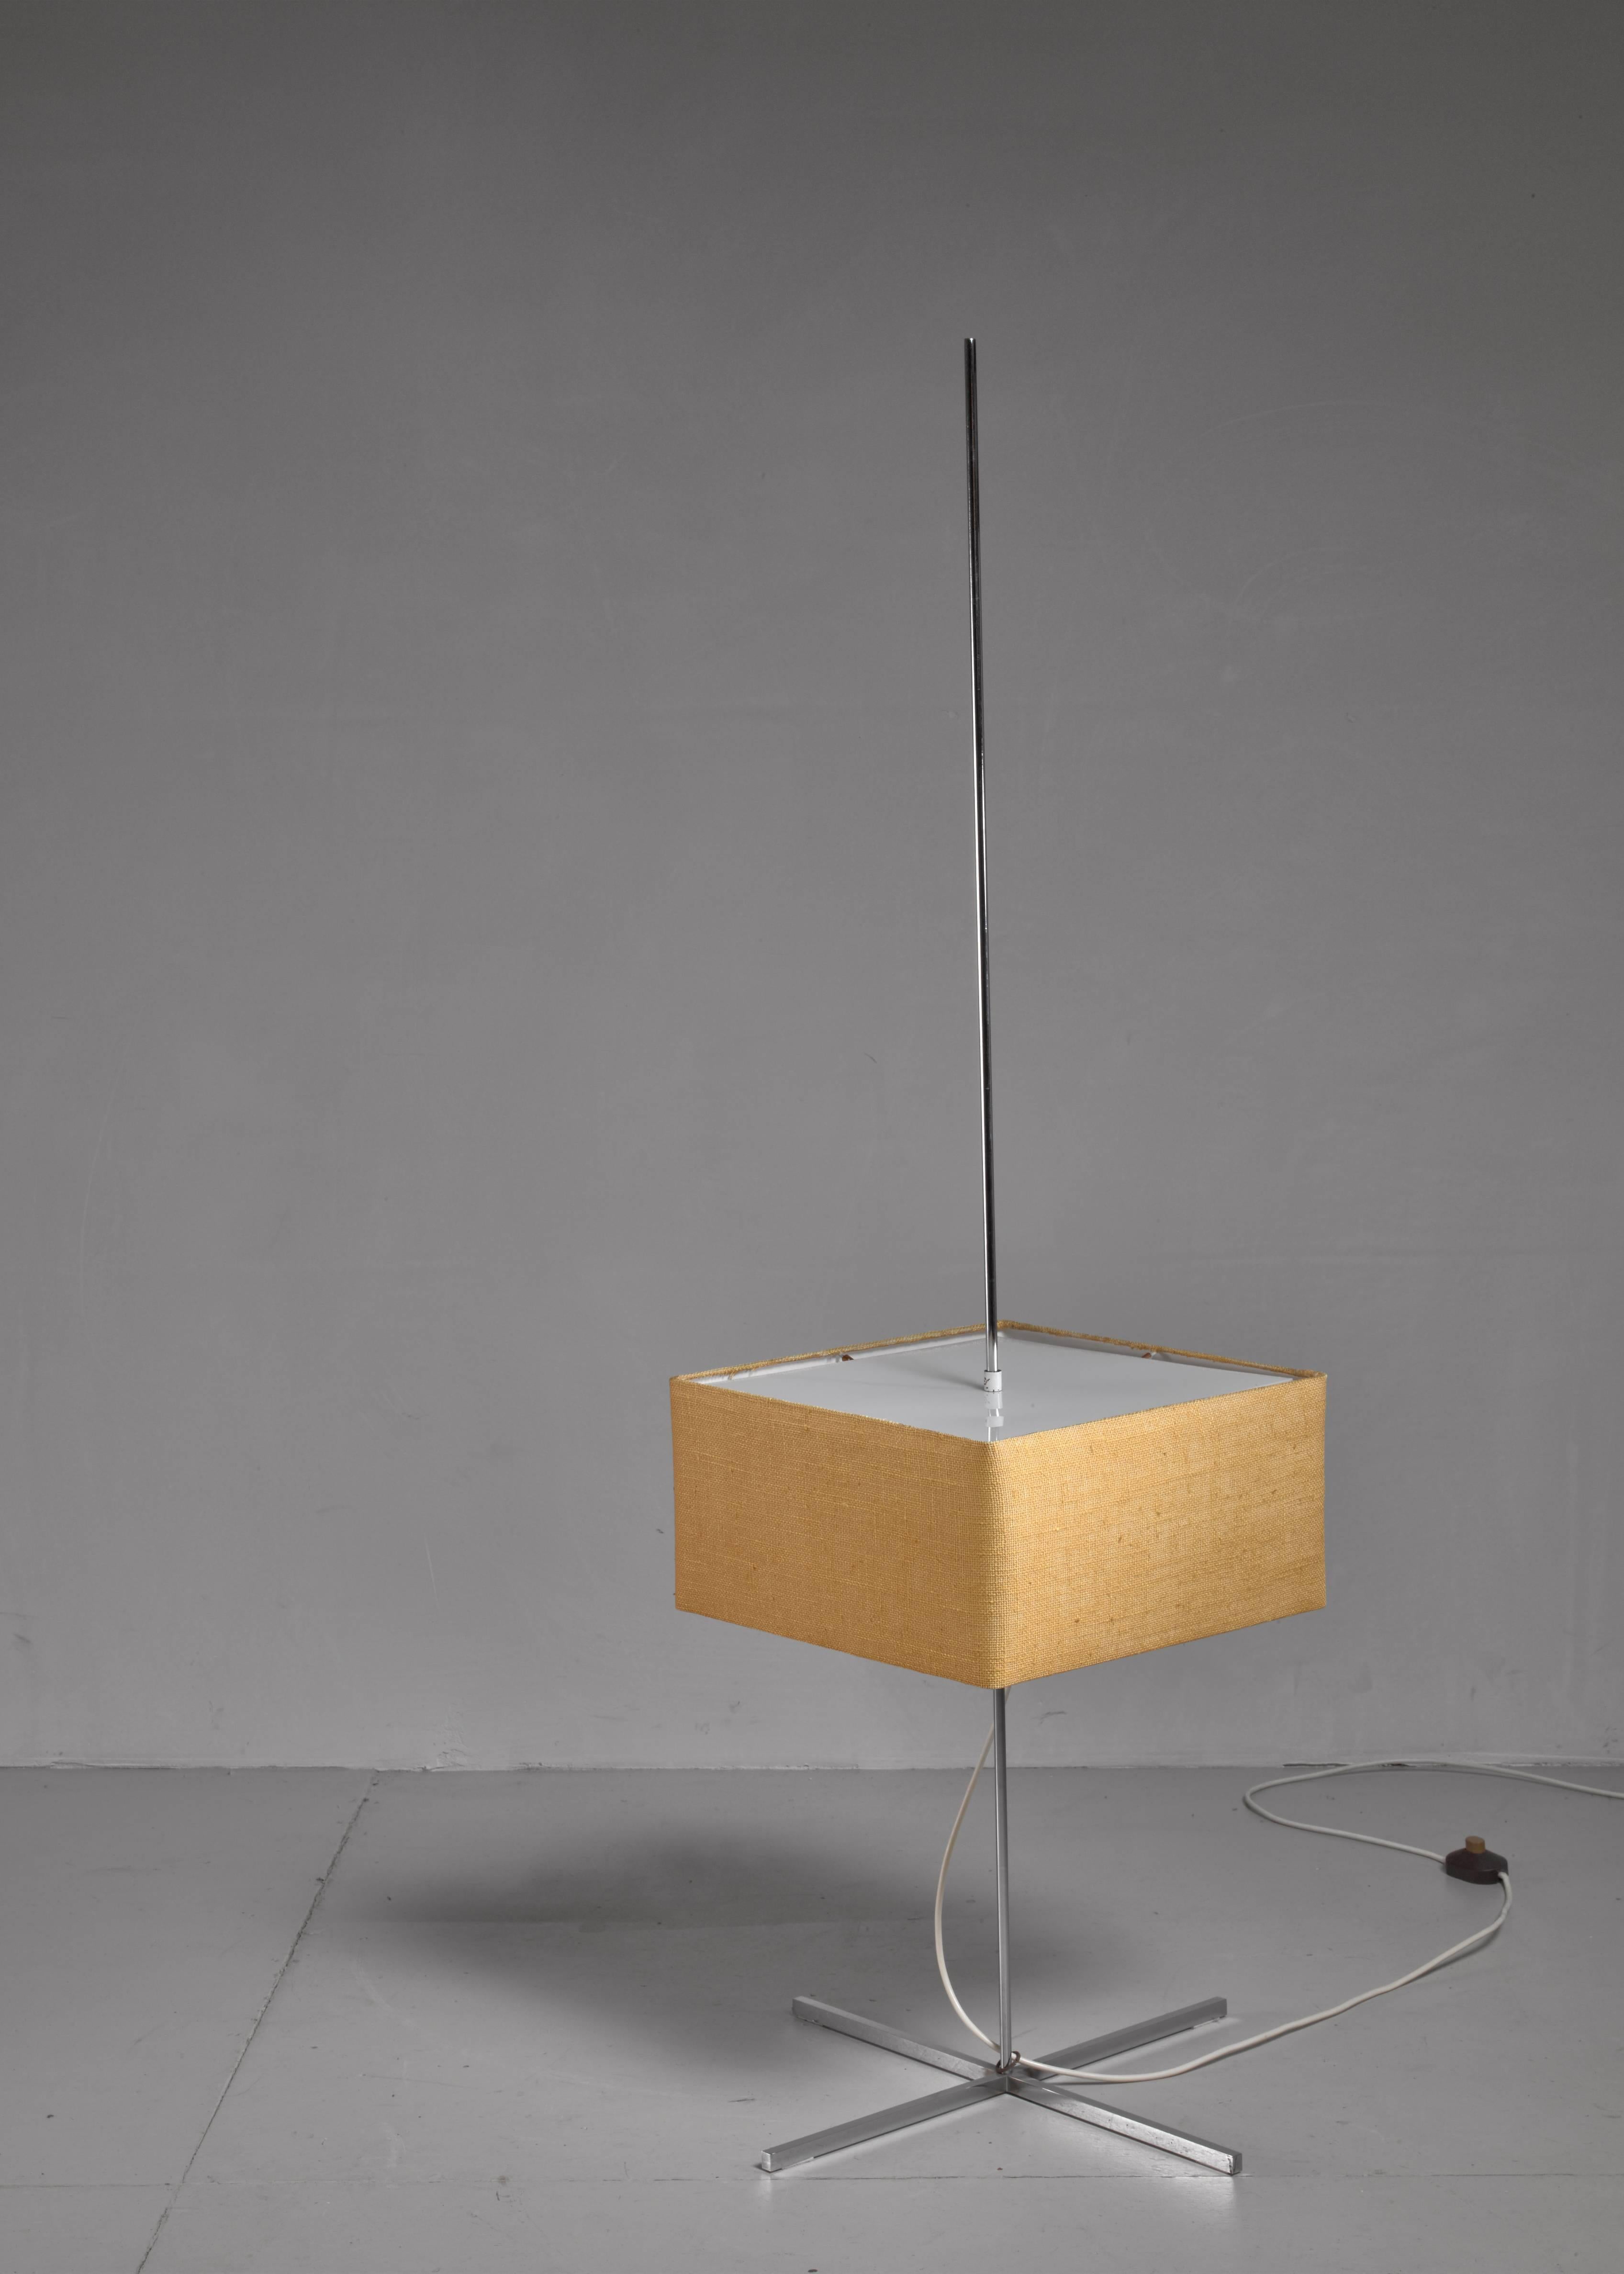 Mid-20th Century Chrome Floor Lamp with an Adjustable Square Fabric Shade, Denmark, 1950s For Sale